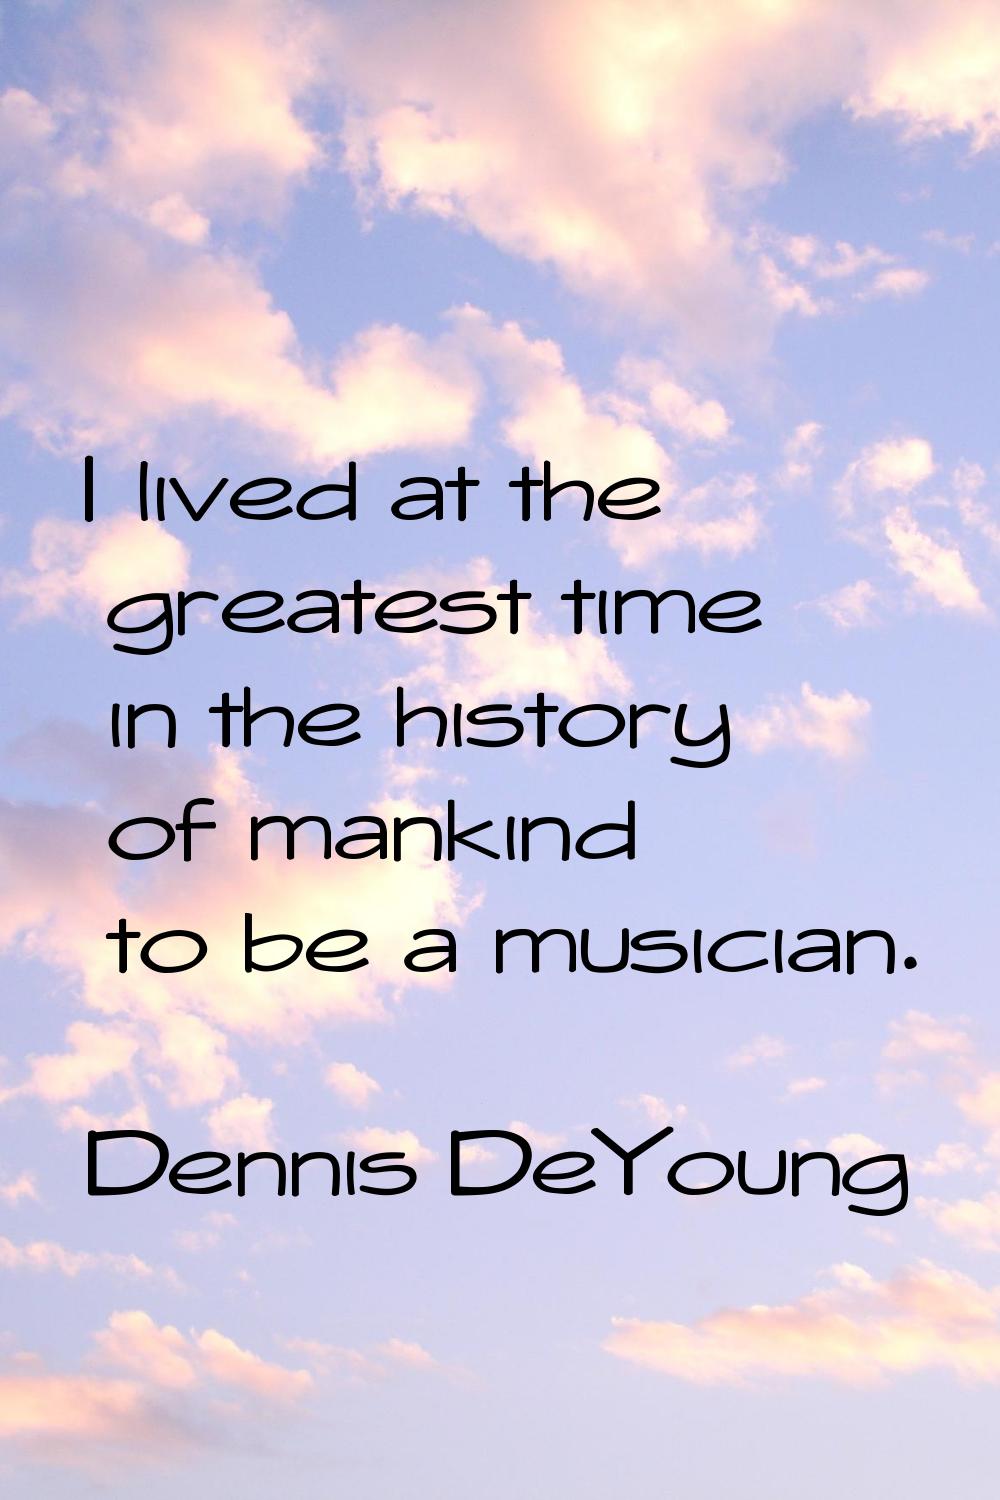 I lived at the greatest time in the history of mankind to be a musician.